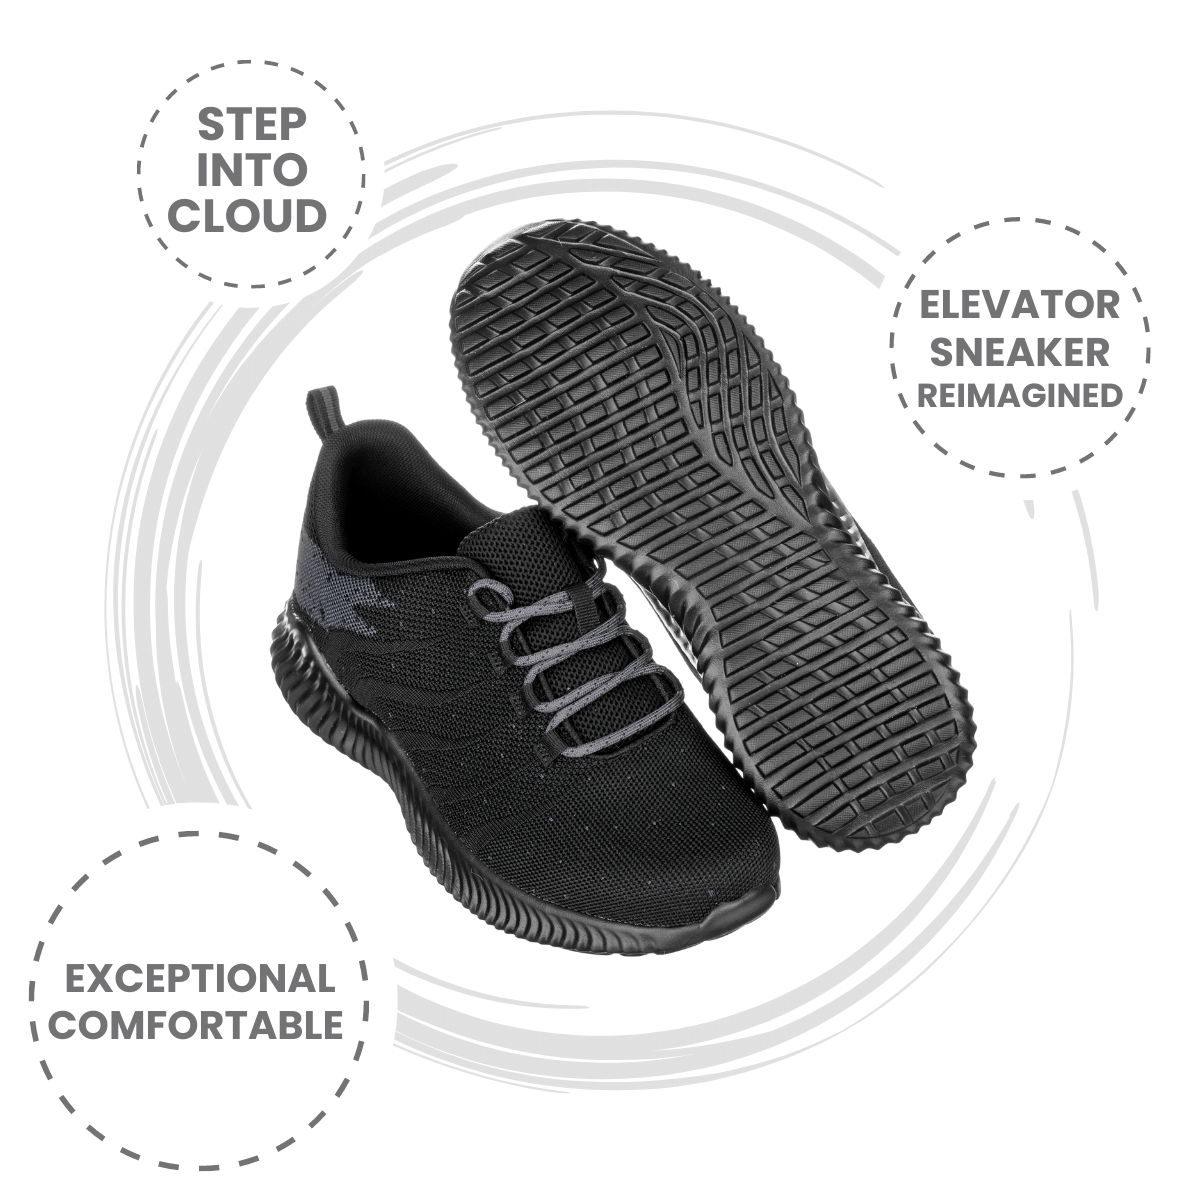 Elevator shoes height increase CALTO - Q216 - 2.8 Inches Taller (Black/Grey) - Ultra Lightweight